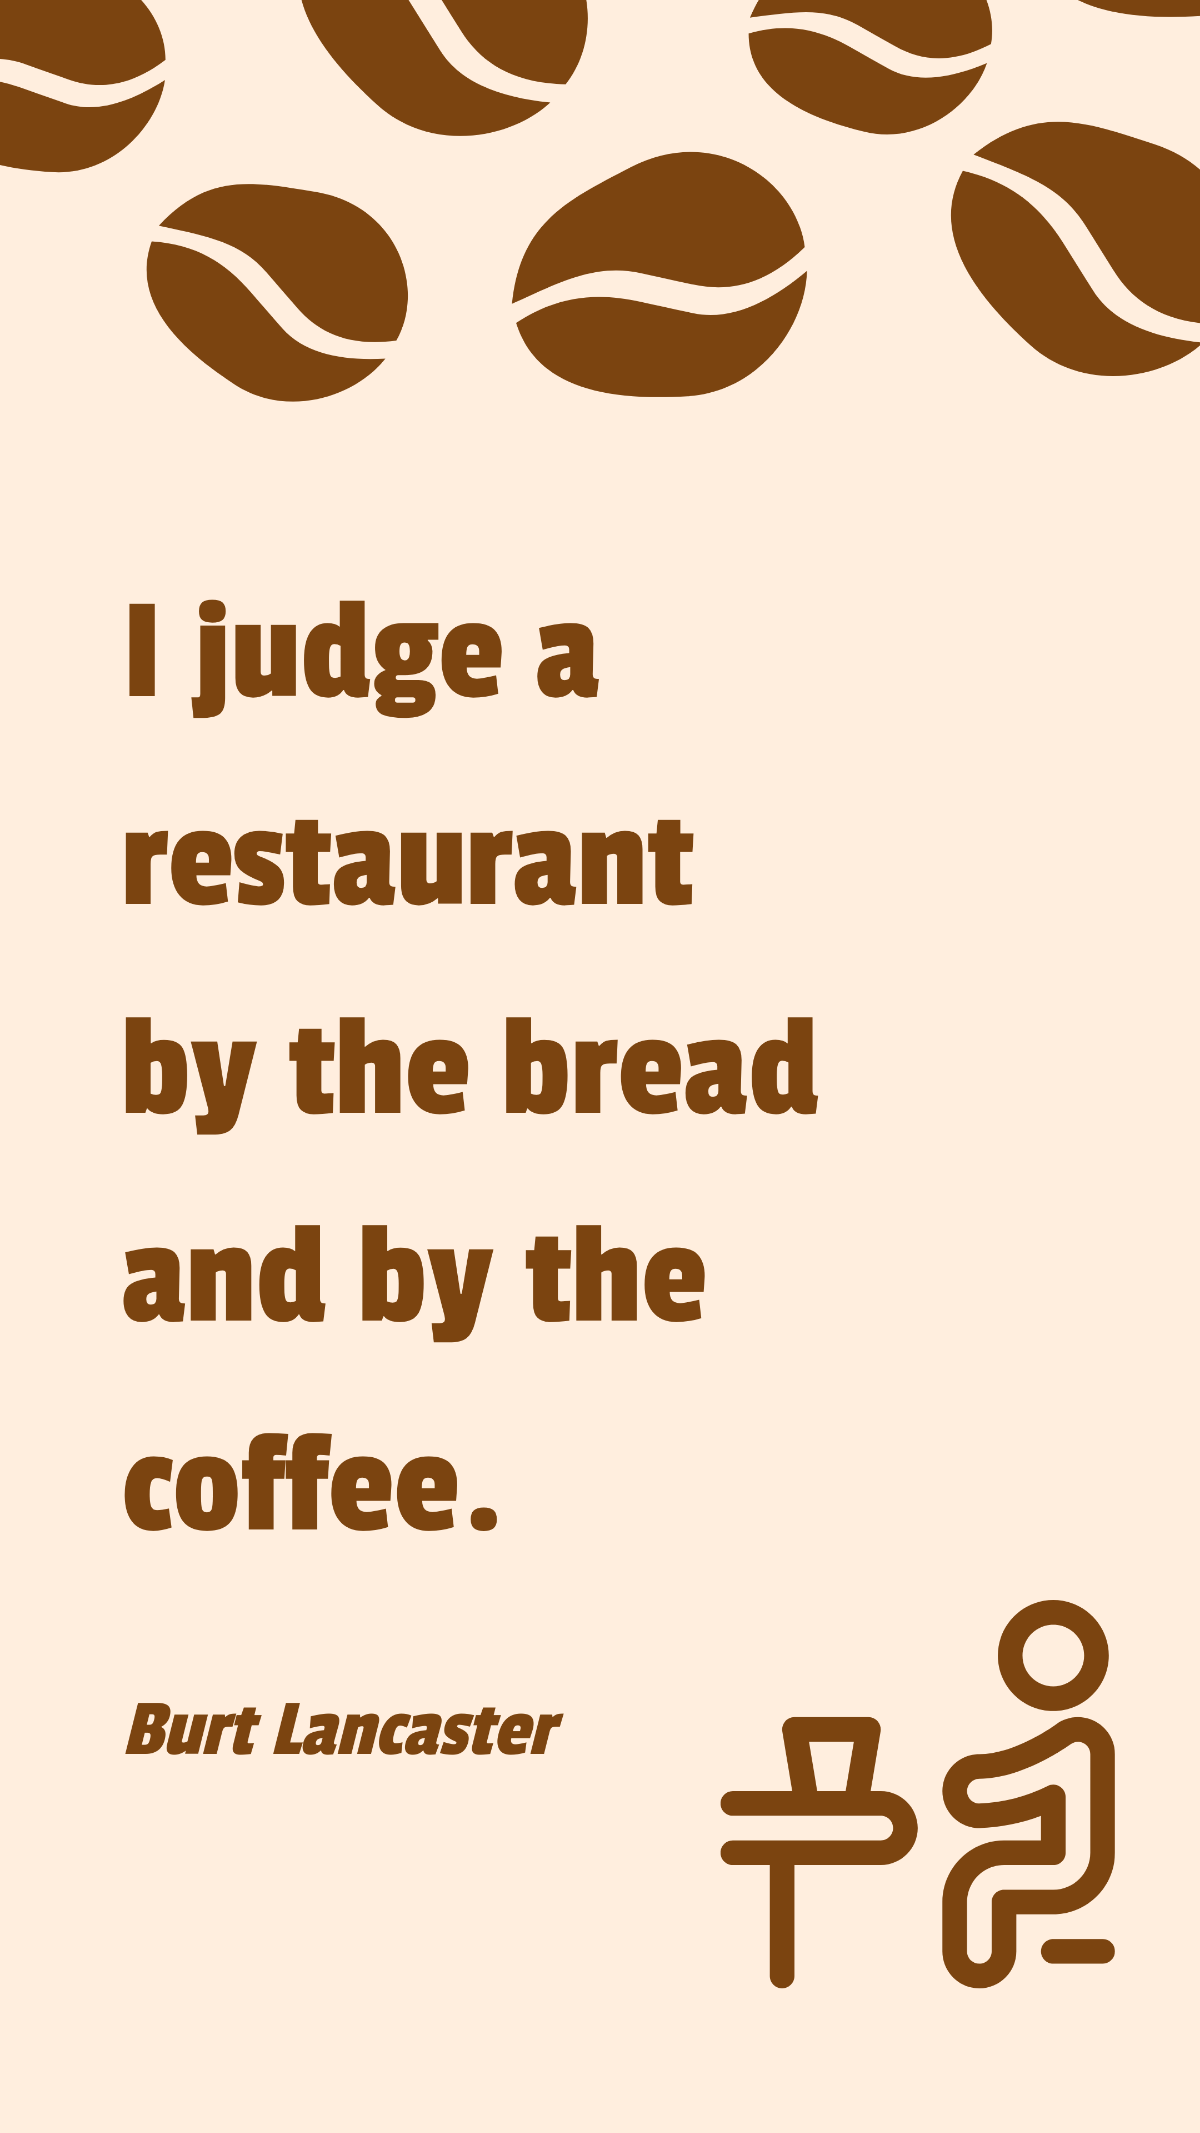 Burt Lancaster - I judge a restaurant by the bread and by the coffee. Template